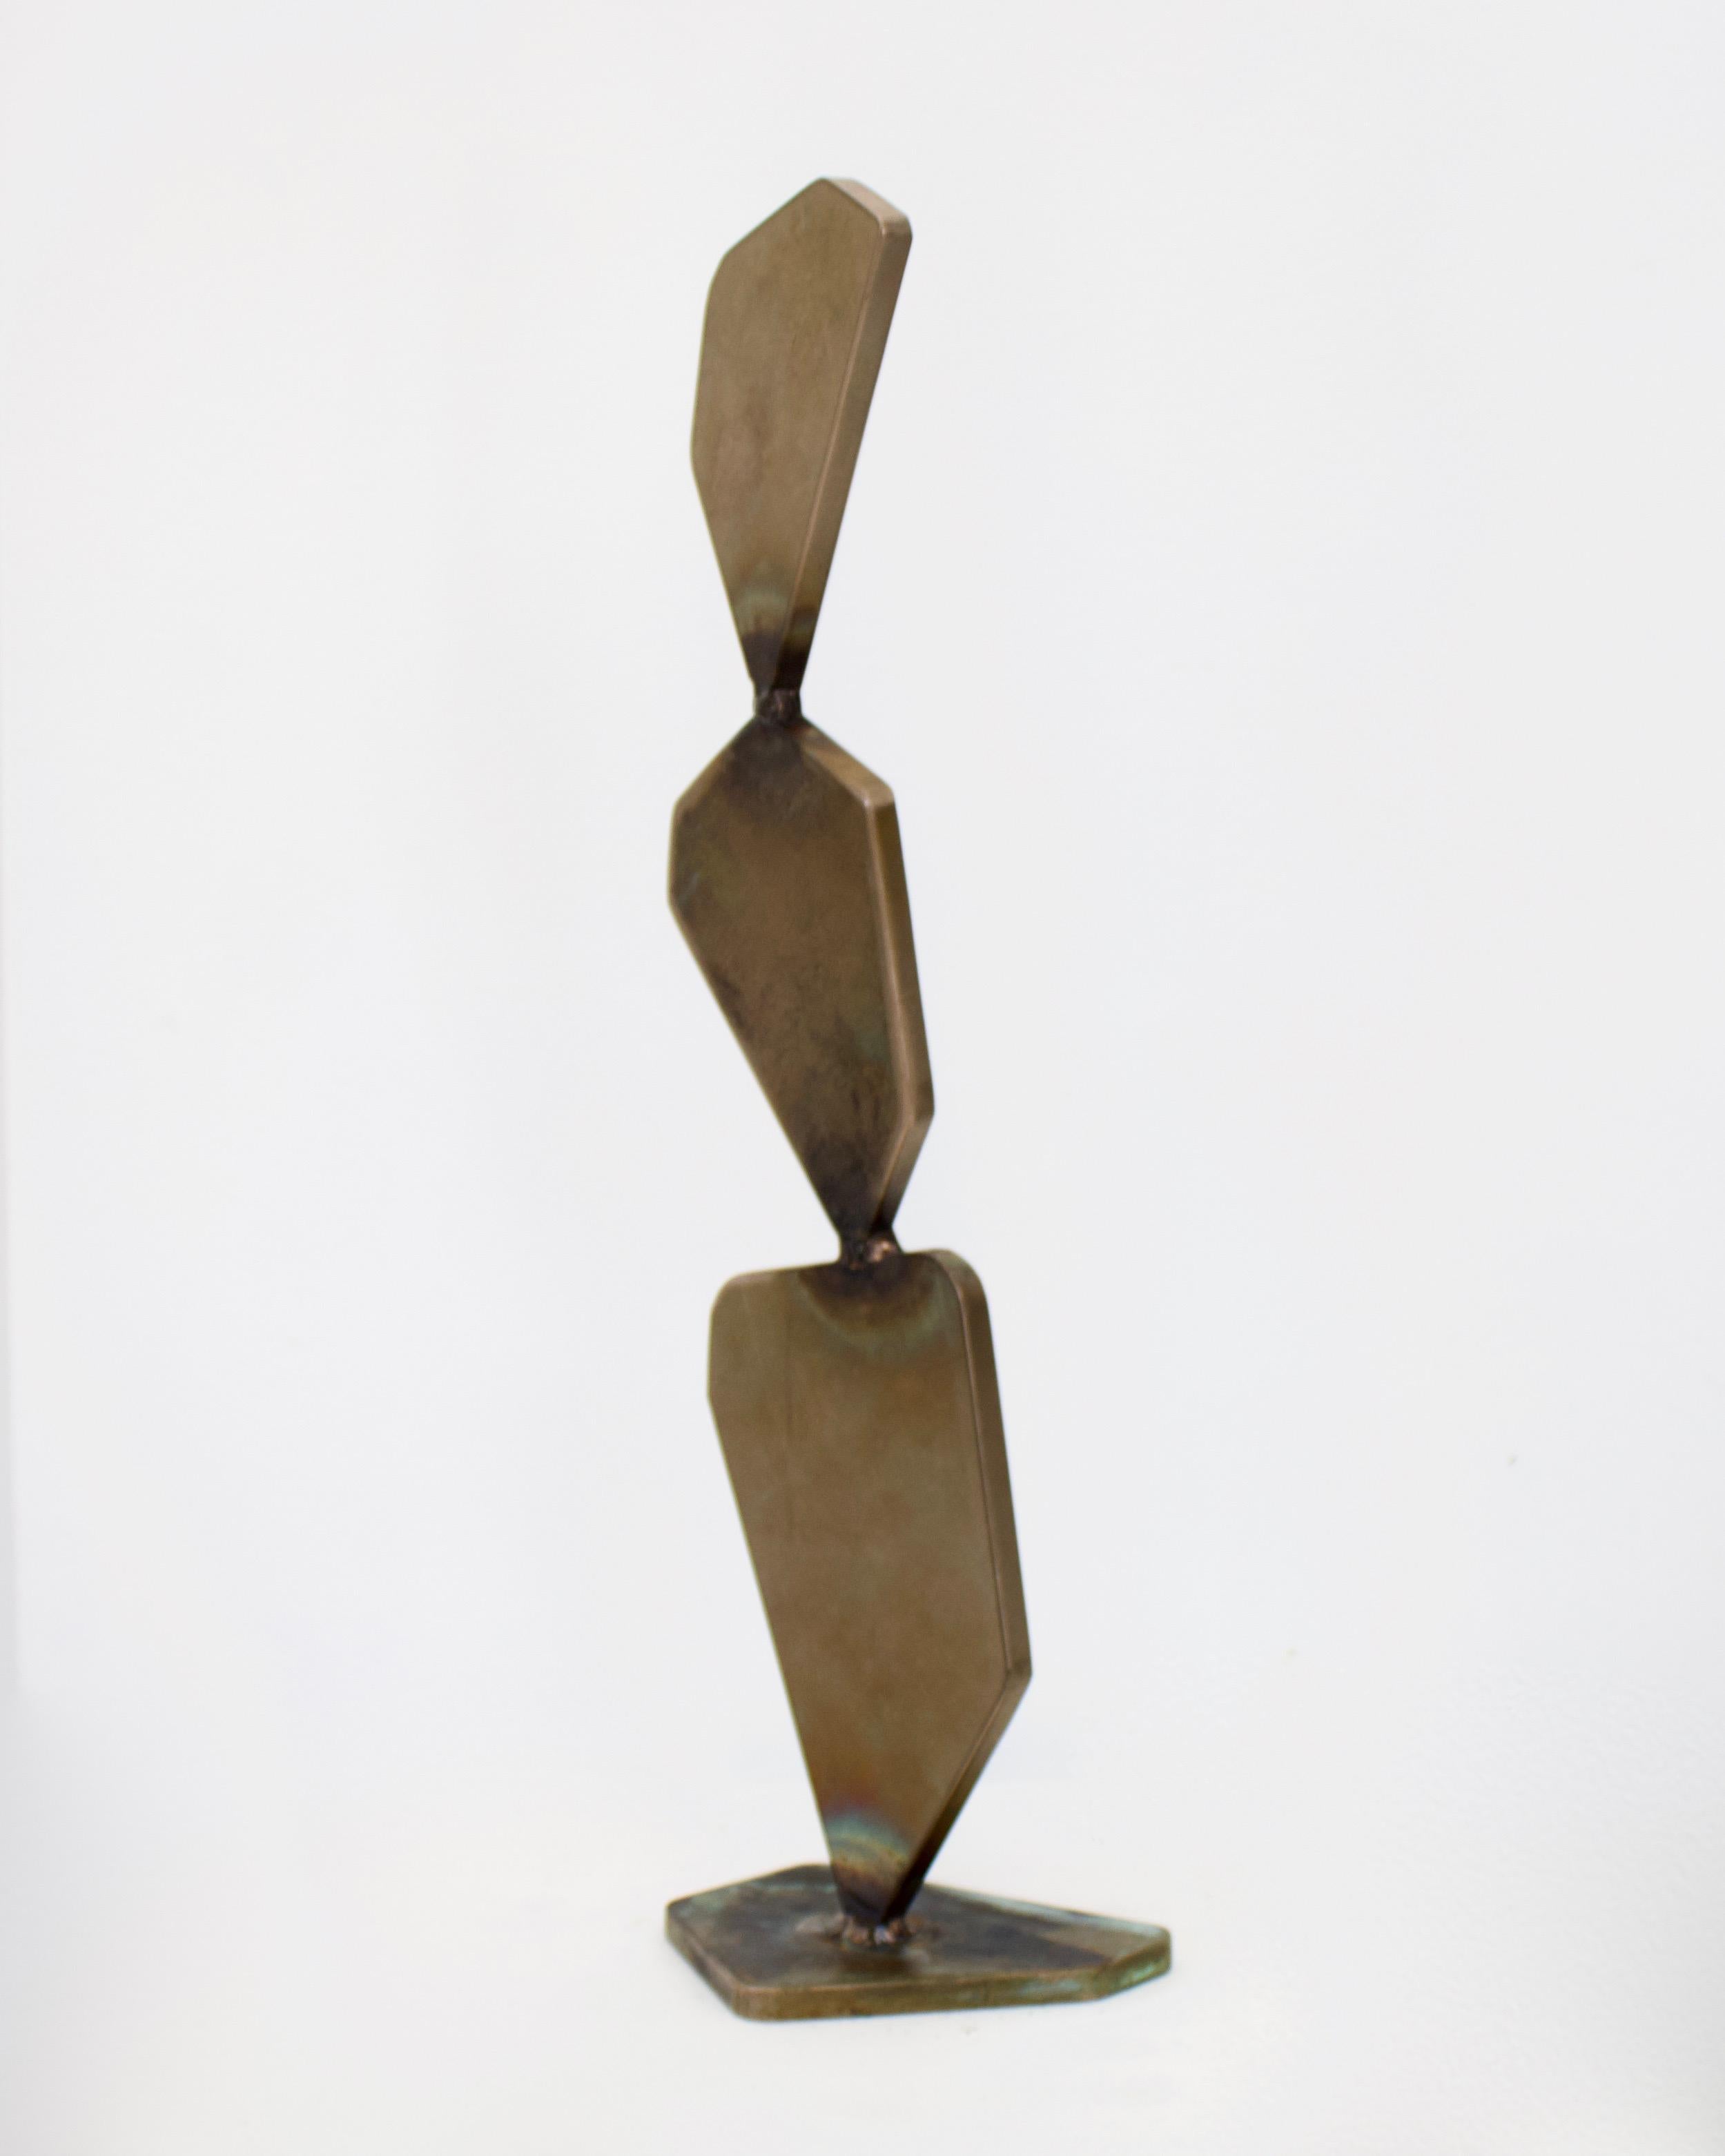 Artist Elliot Bergman bronze small welded polygon sculpture. 
Composed of 3 faceted planes of bronze welded together to form a smaller version of large sculptures Bergman created in 2020 for Resonant Body exhibit at Shane Campbell Gallery. The